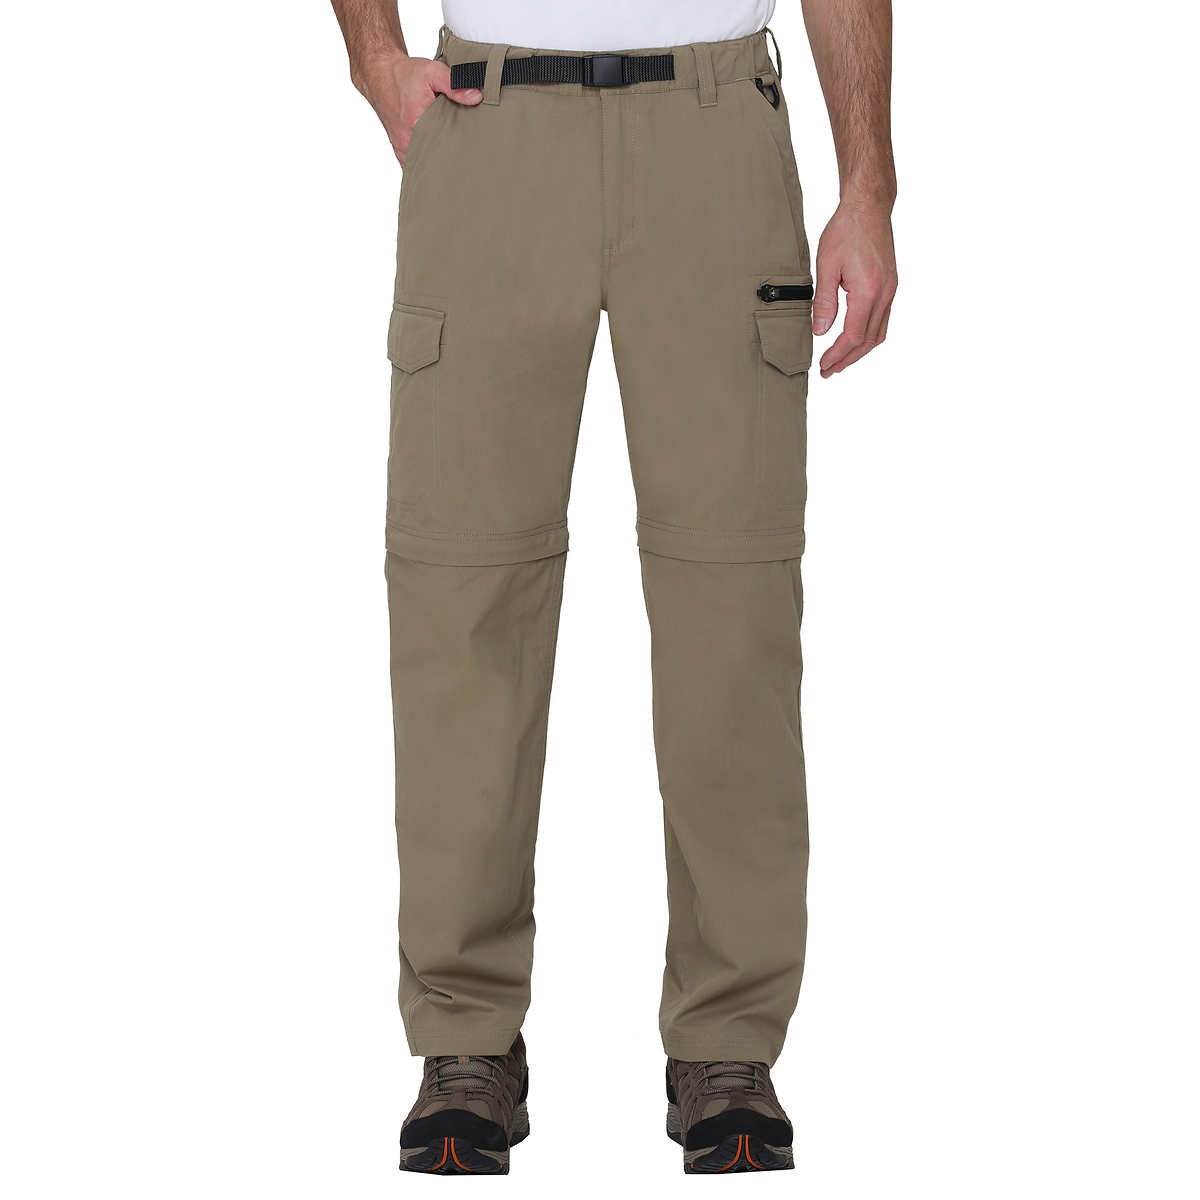 Trending Wholesale ladies trousers cargo pants At Affordable Prices –